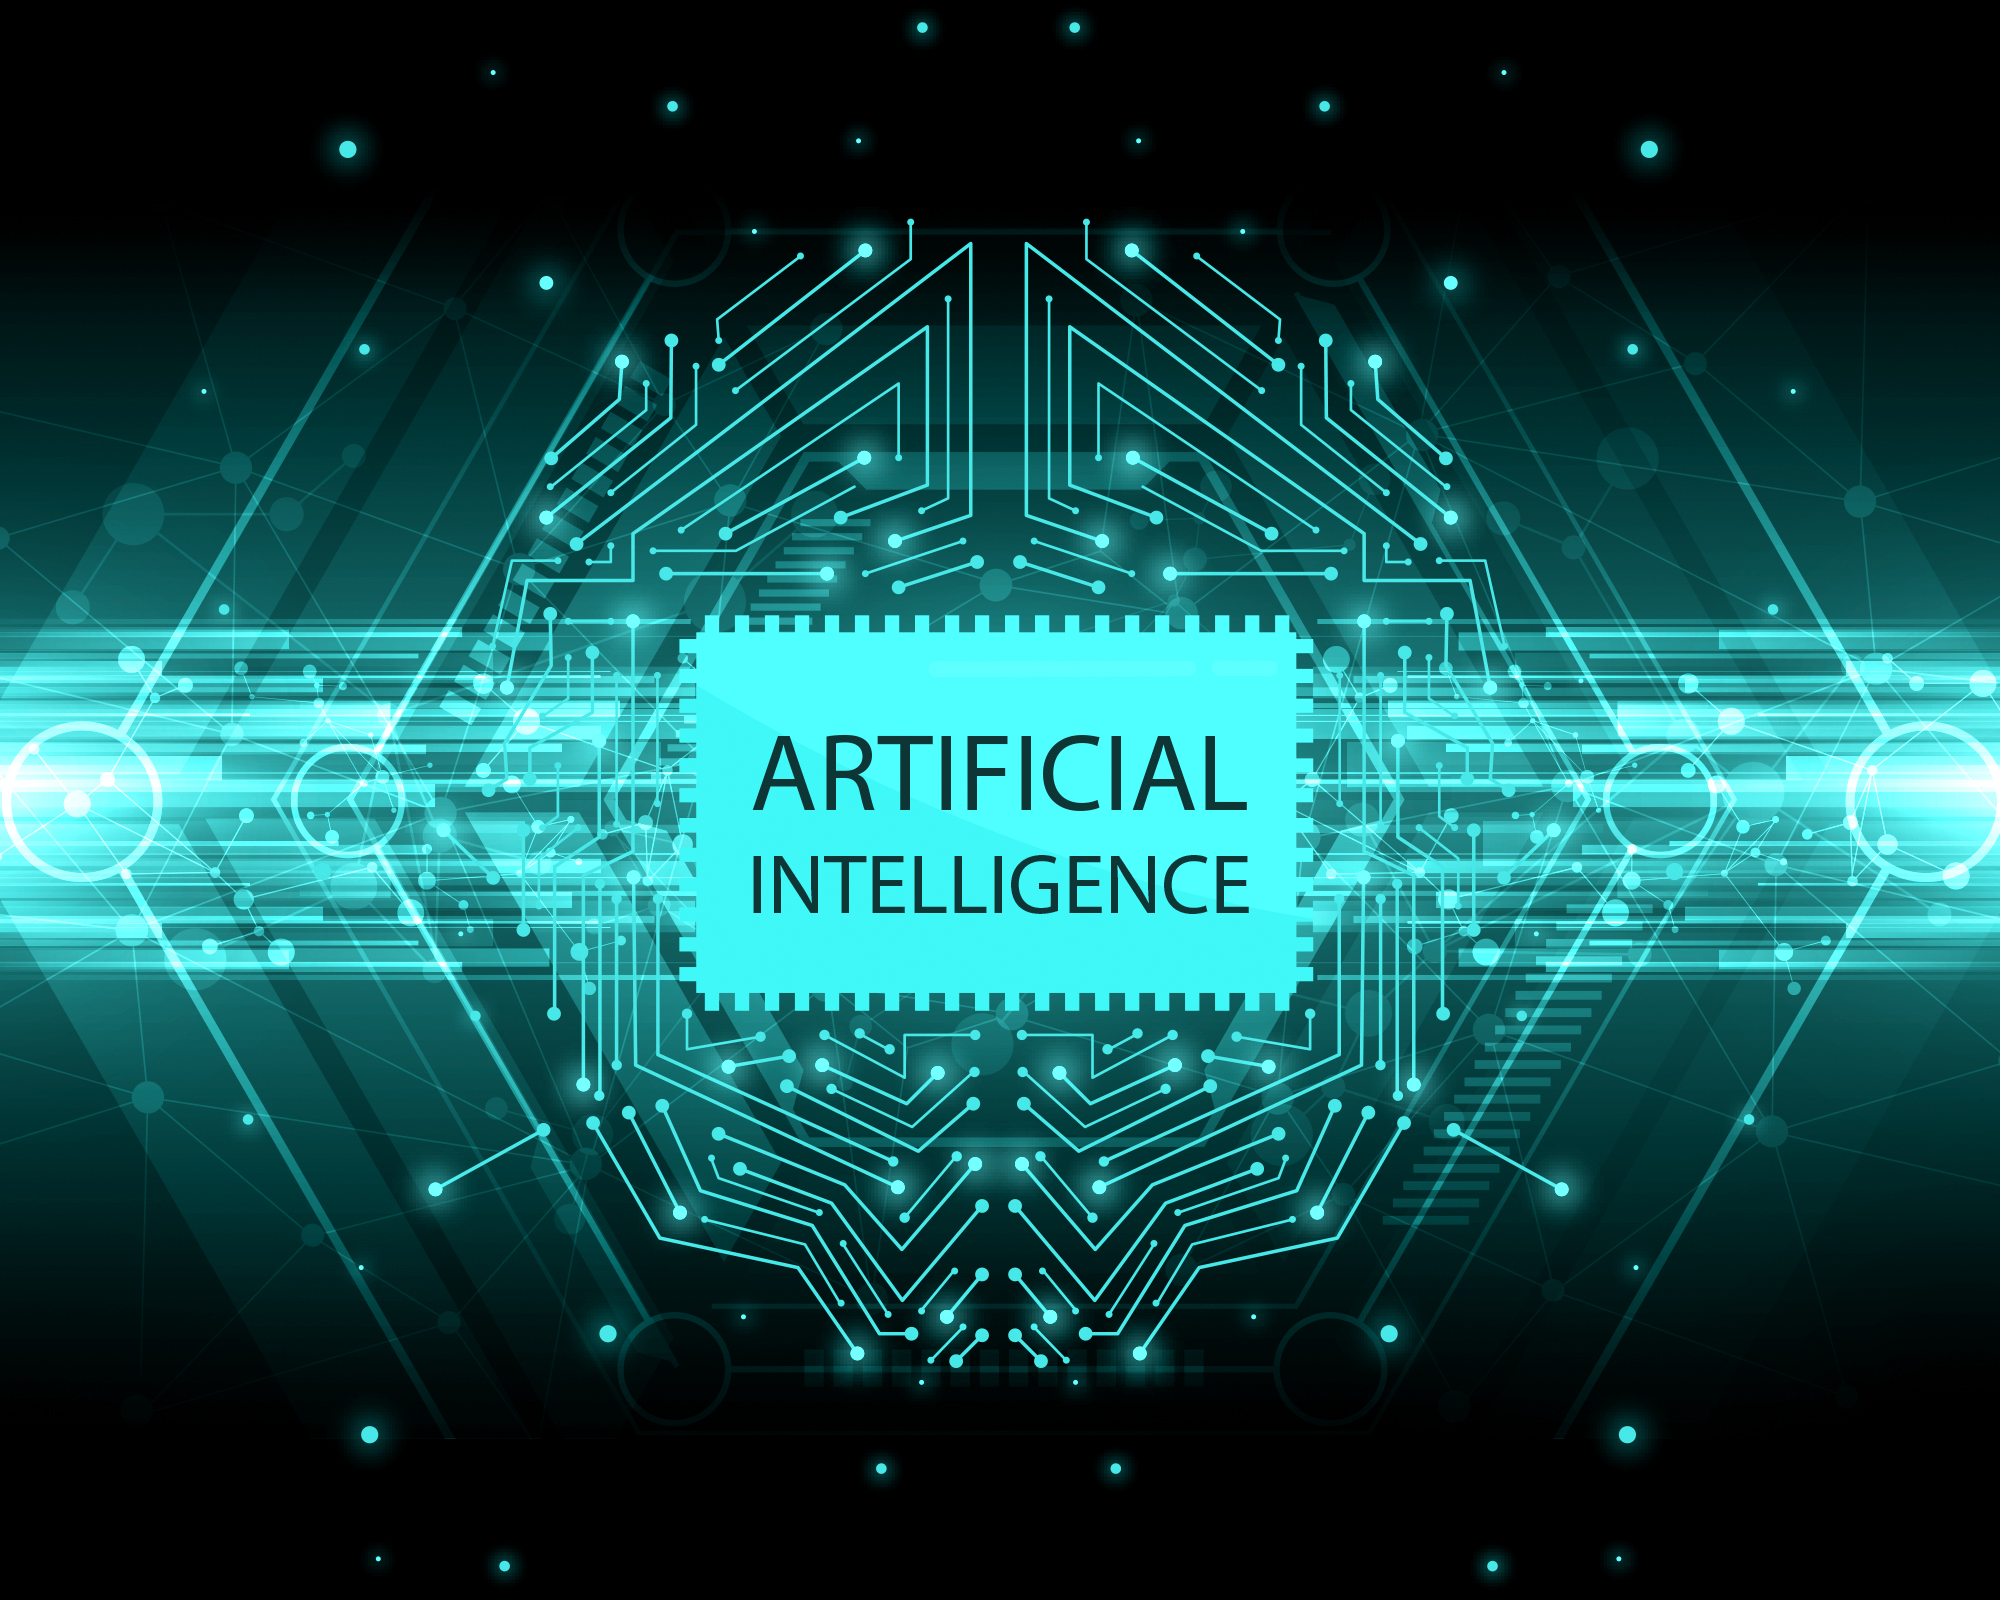 the words Artificial Intelligence against a turquoise and black background and a geometric patterns of connections